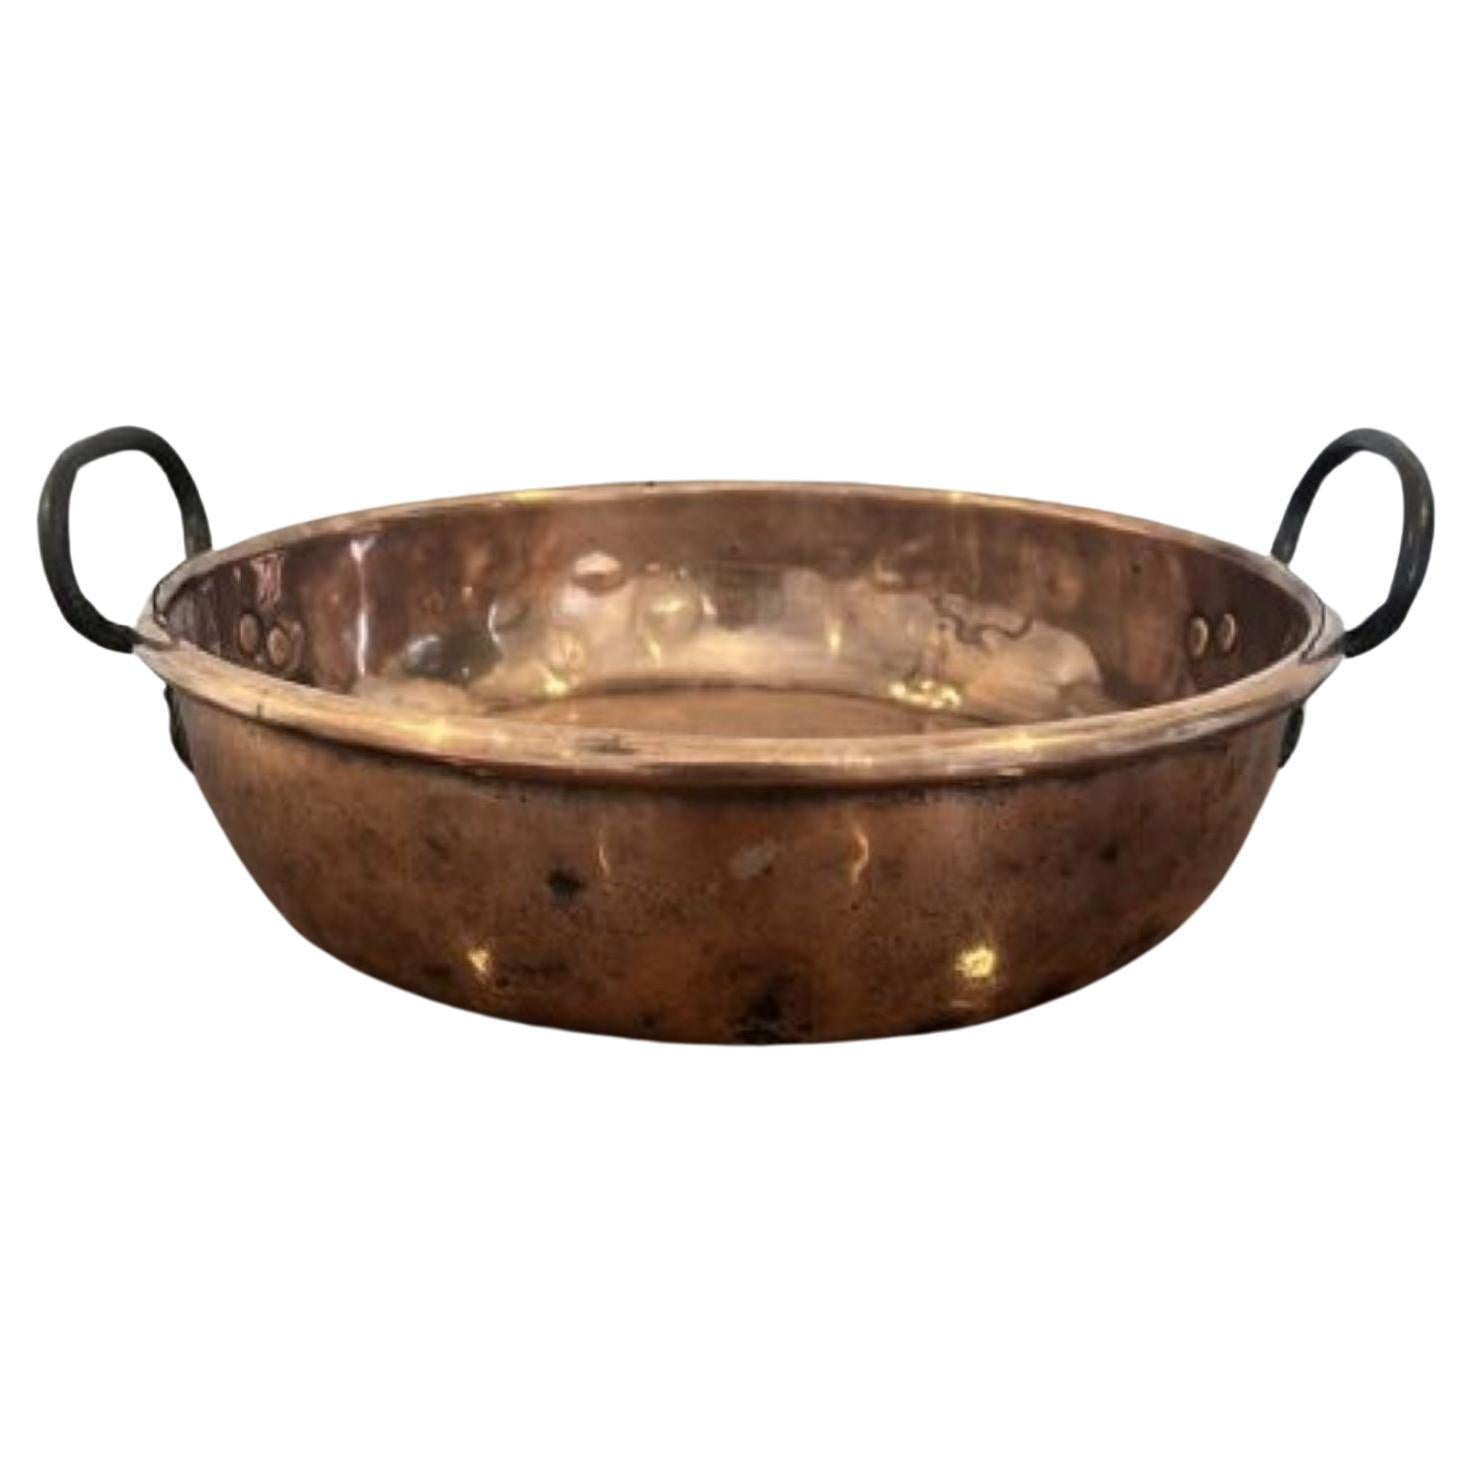 Quality antique George III large copper pan For Sale